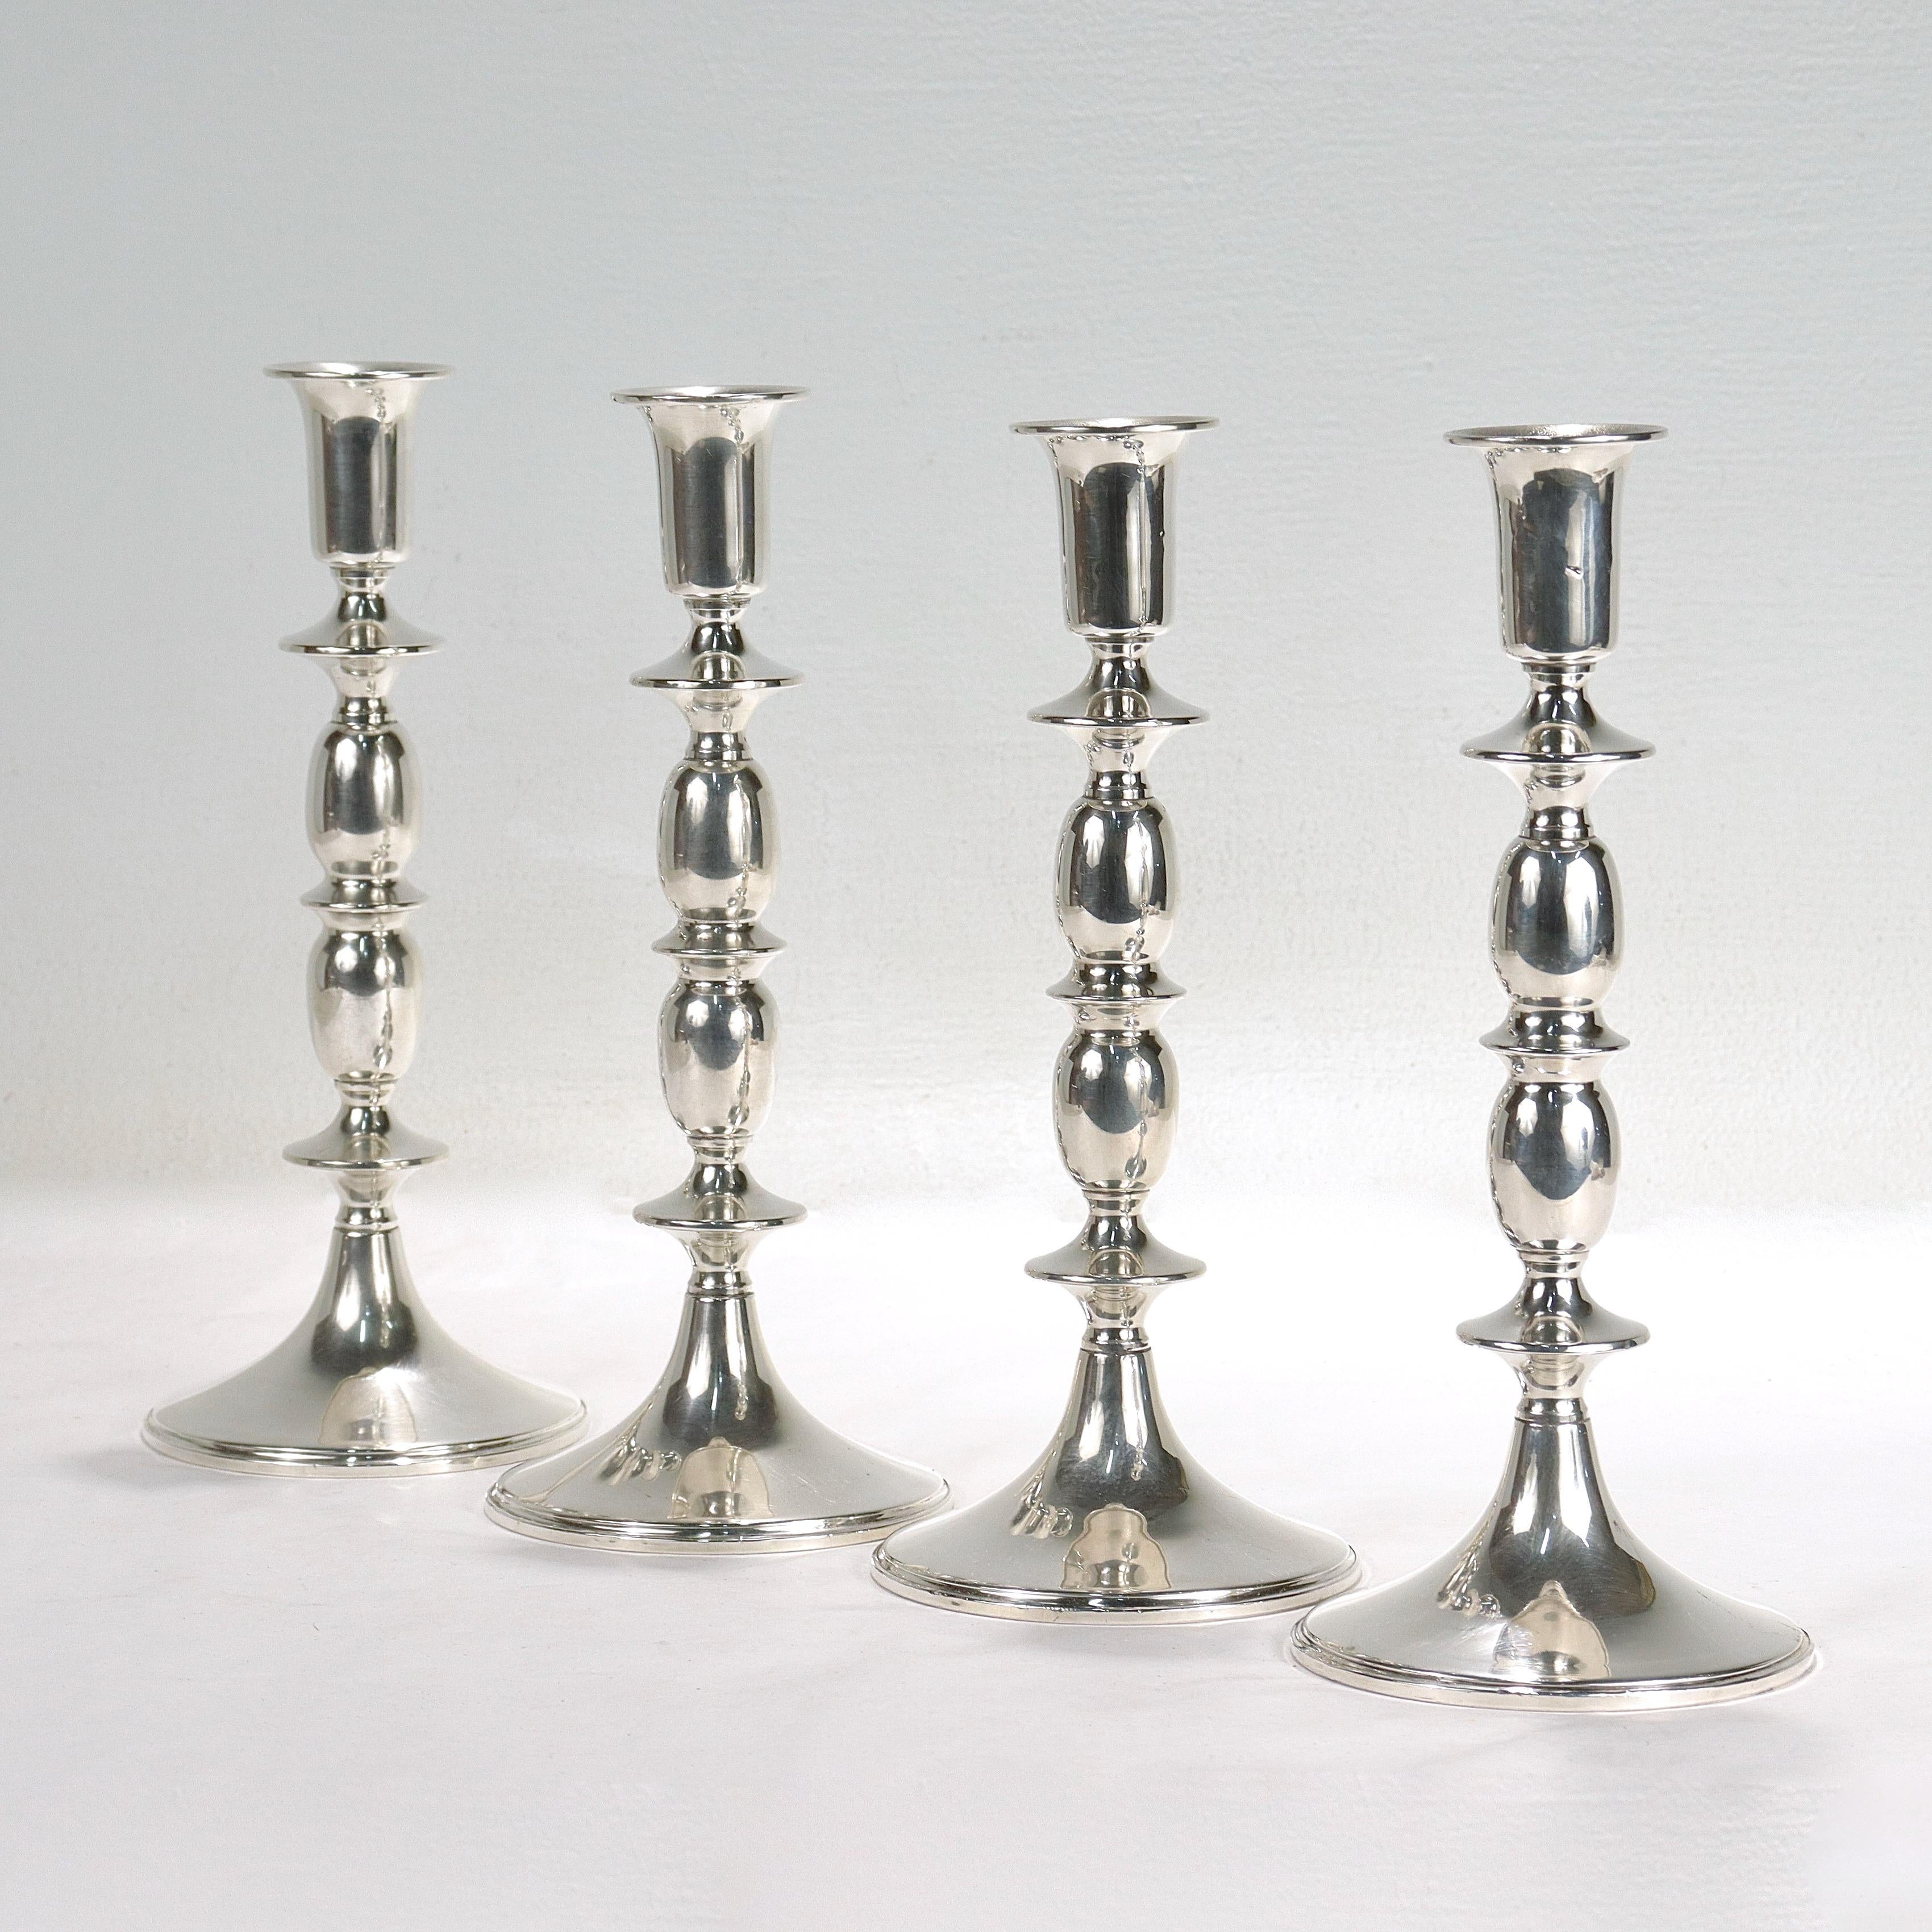 A fine set of 4 matching silver candlesticks.

In sterling silver.

By Empire.

Model no. 635.

Each with a candlecup supported by a 